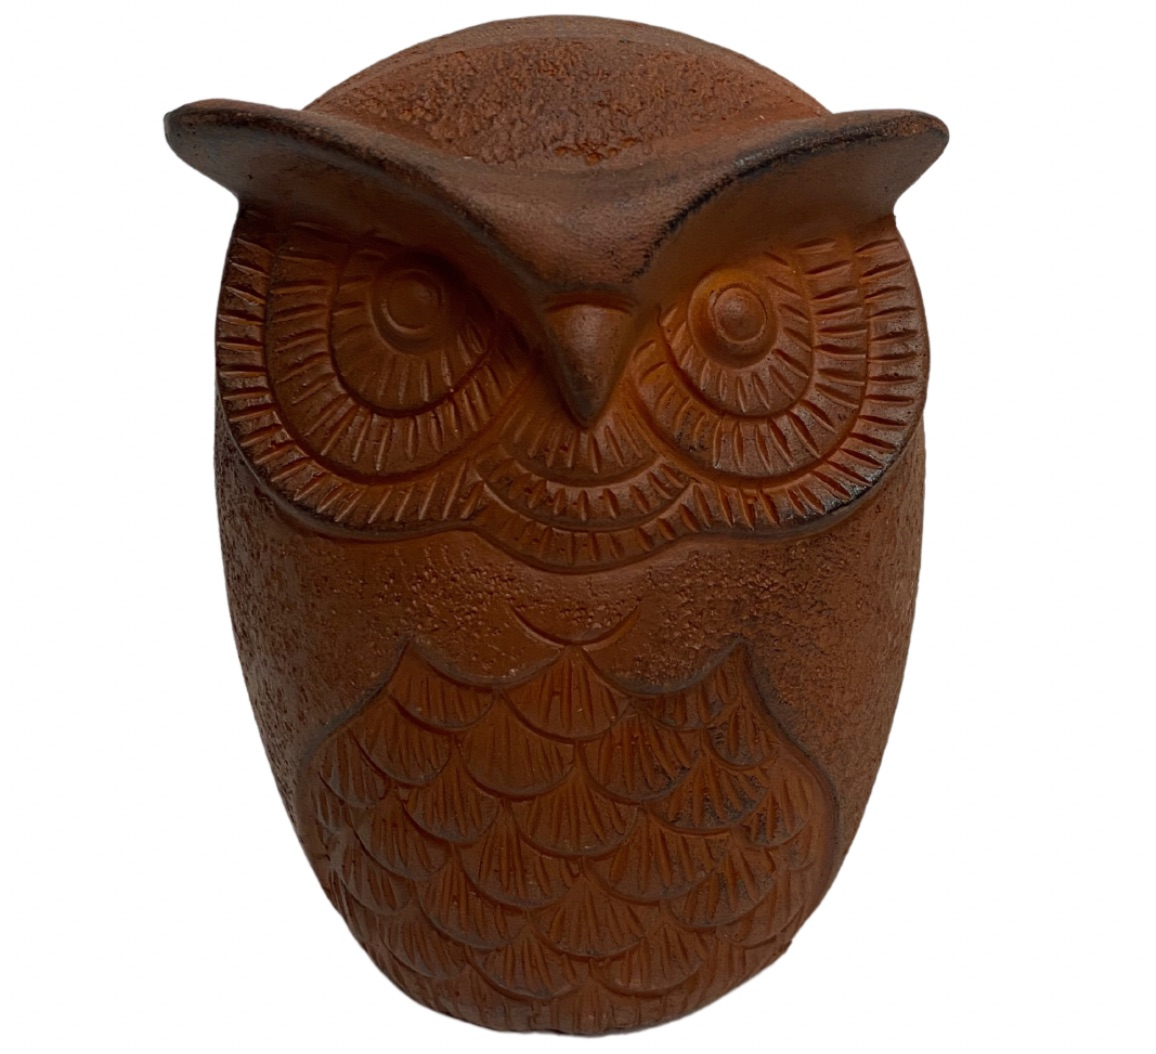 Rustic Owl Table Decor  Available in 2 Styles